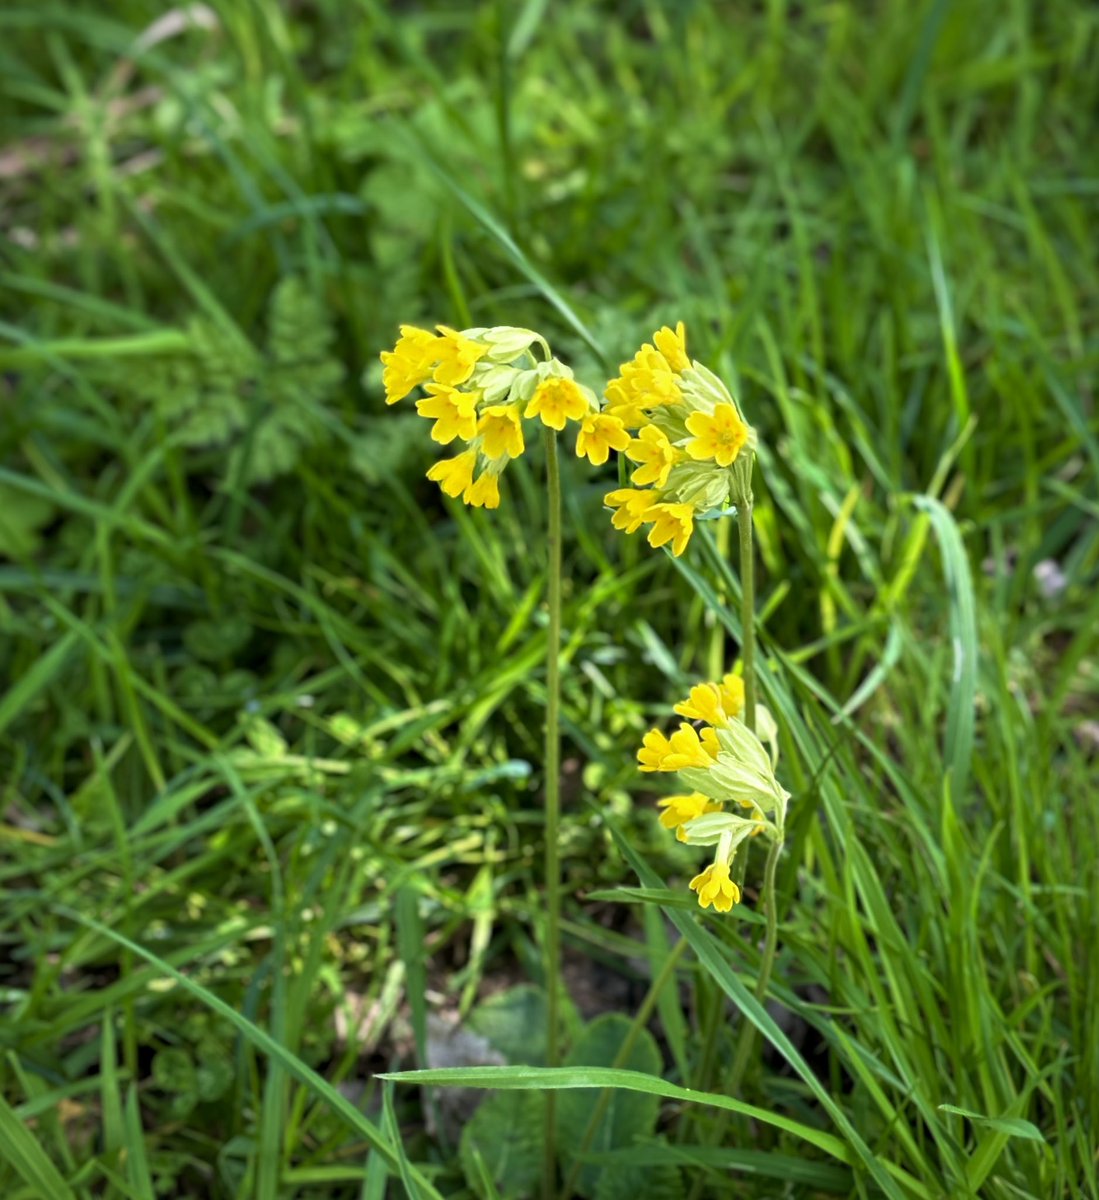 I love cowslips there’s some lovely lore around them. Apparently they were used to make beauty potions Culpepper says they can even restore beauty to those who have lost theirs! Good for curing nightmares too he says. 
Photographed today in Biggleswade.